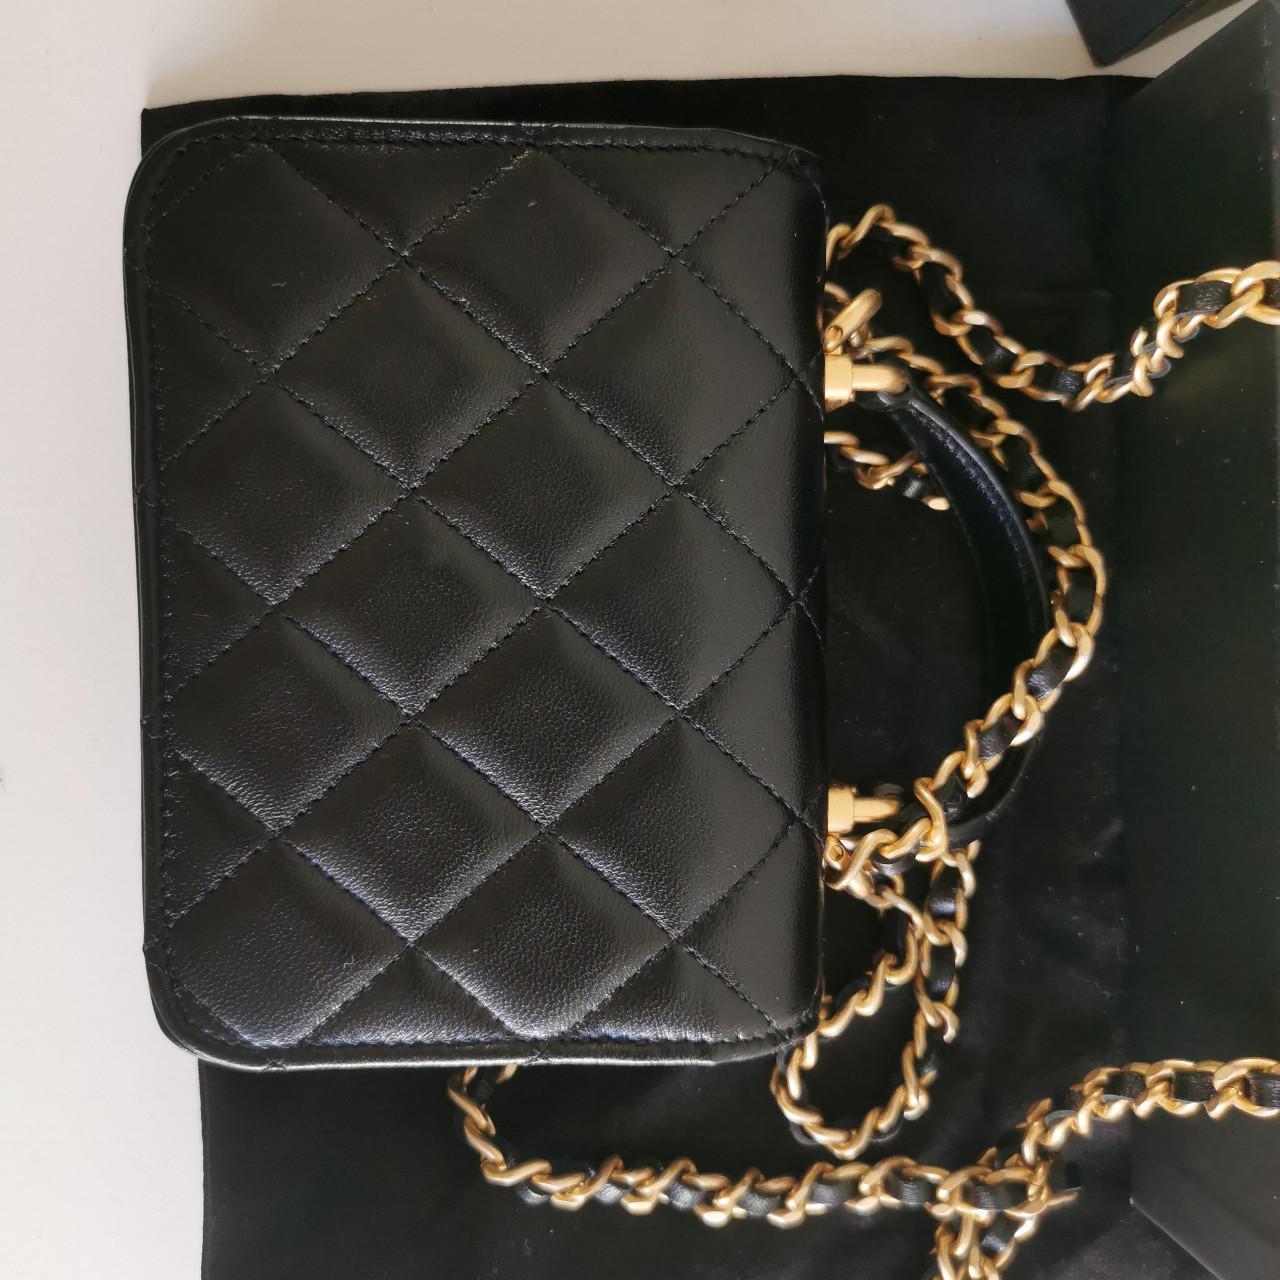 Chanel Women's Black and Gold Bag (4)